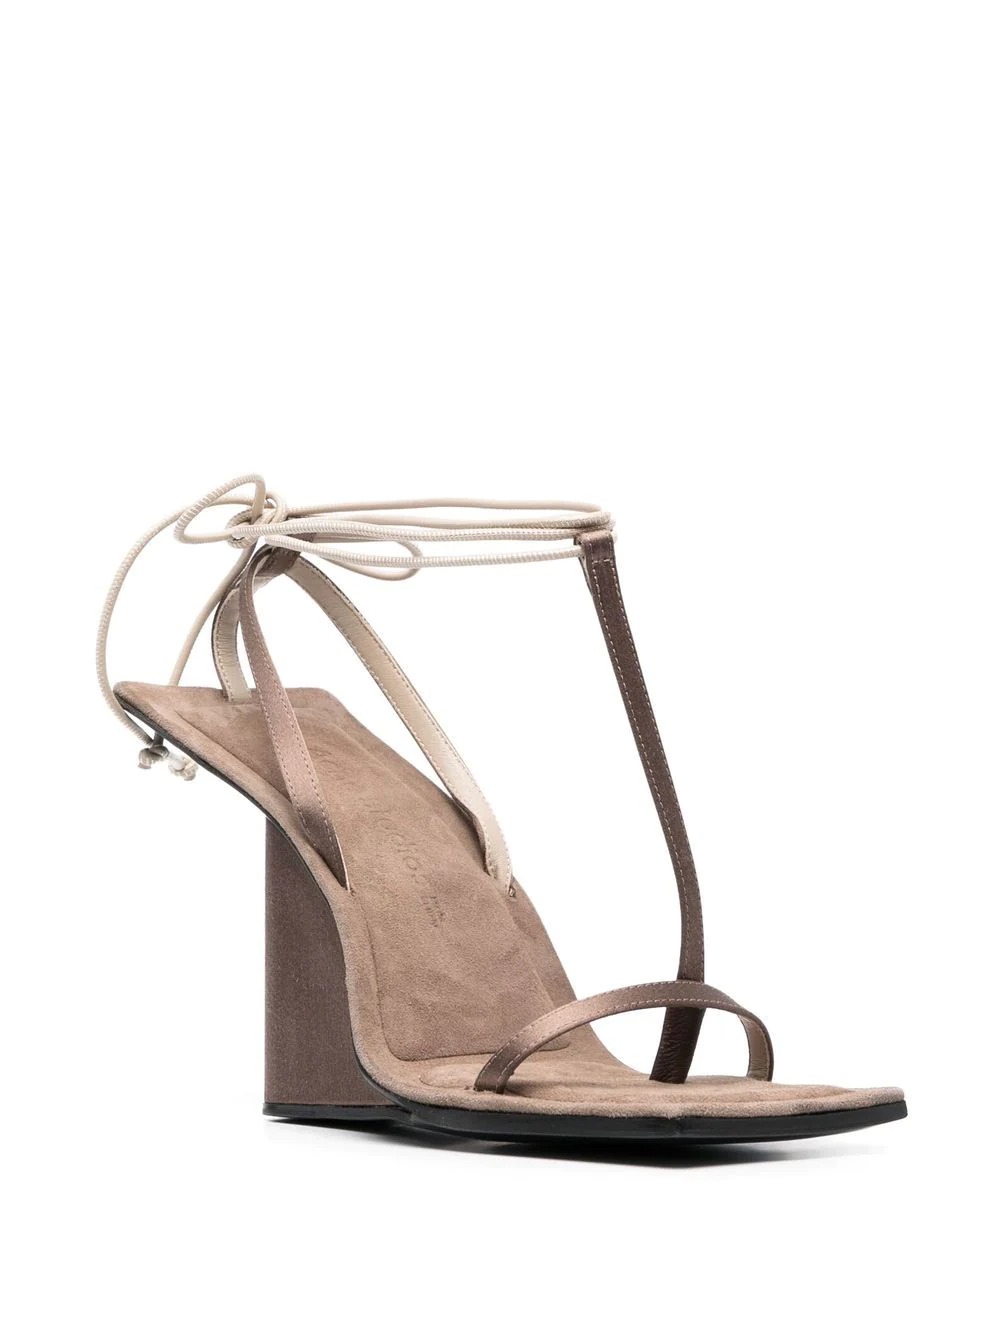 strappy wedge sandals for outdoor wedding